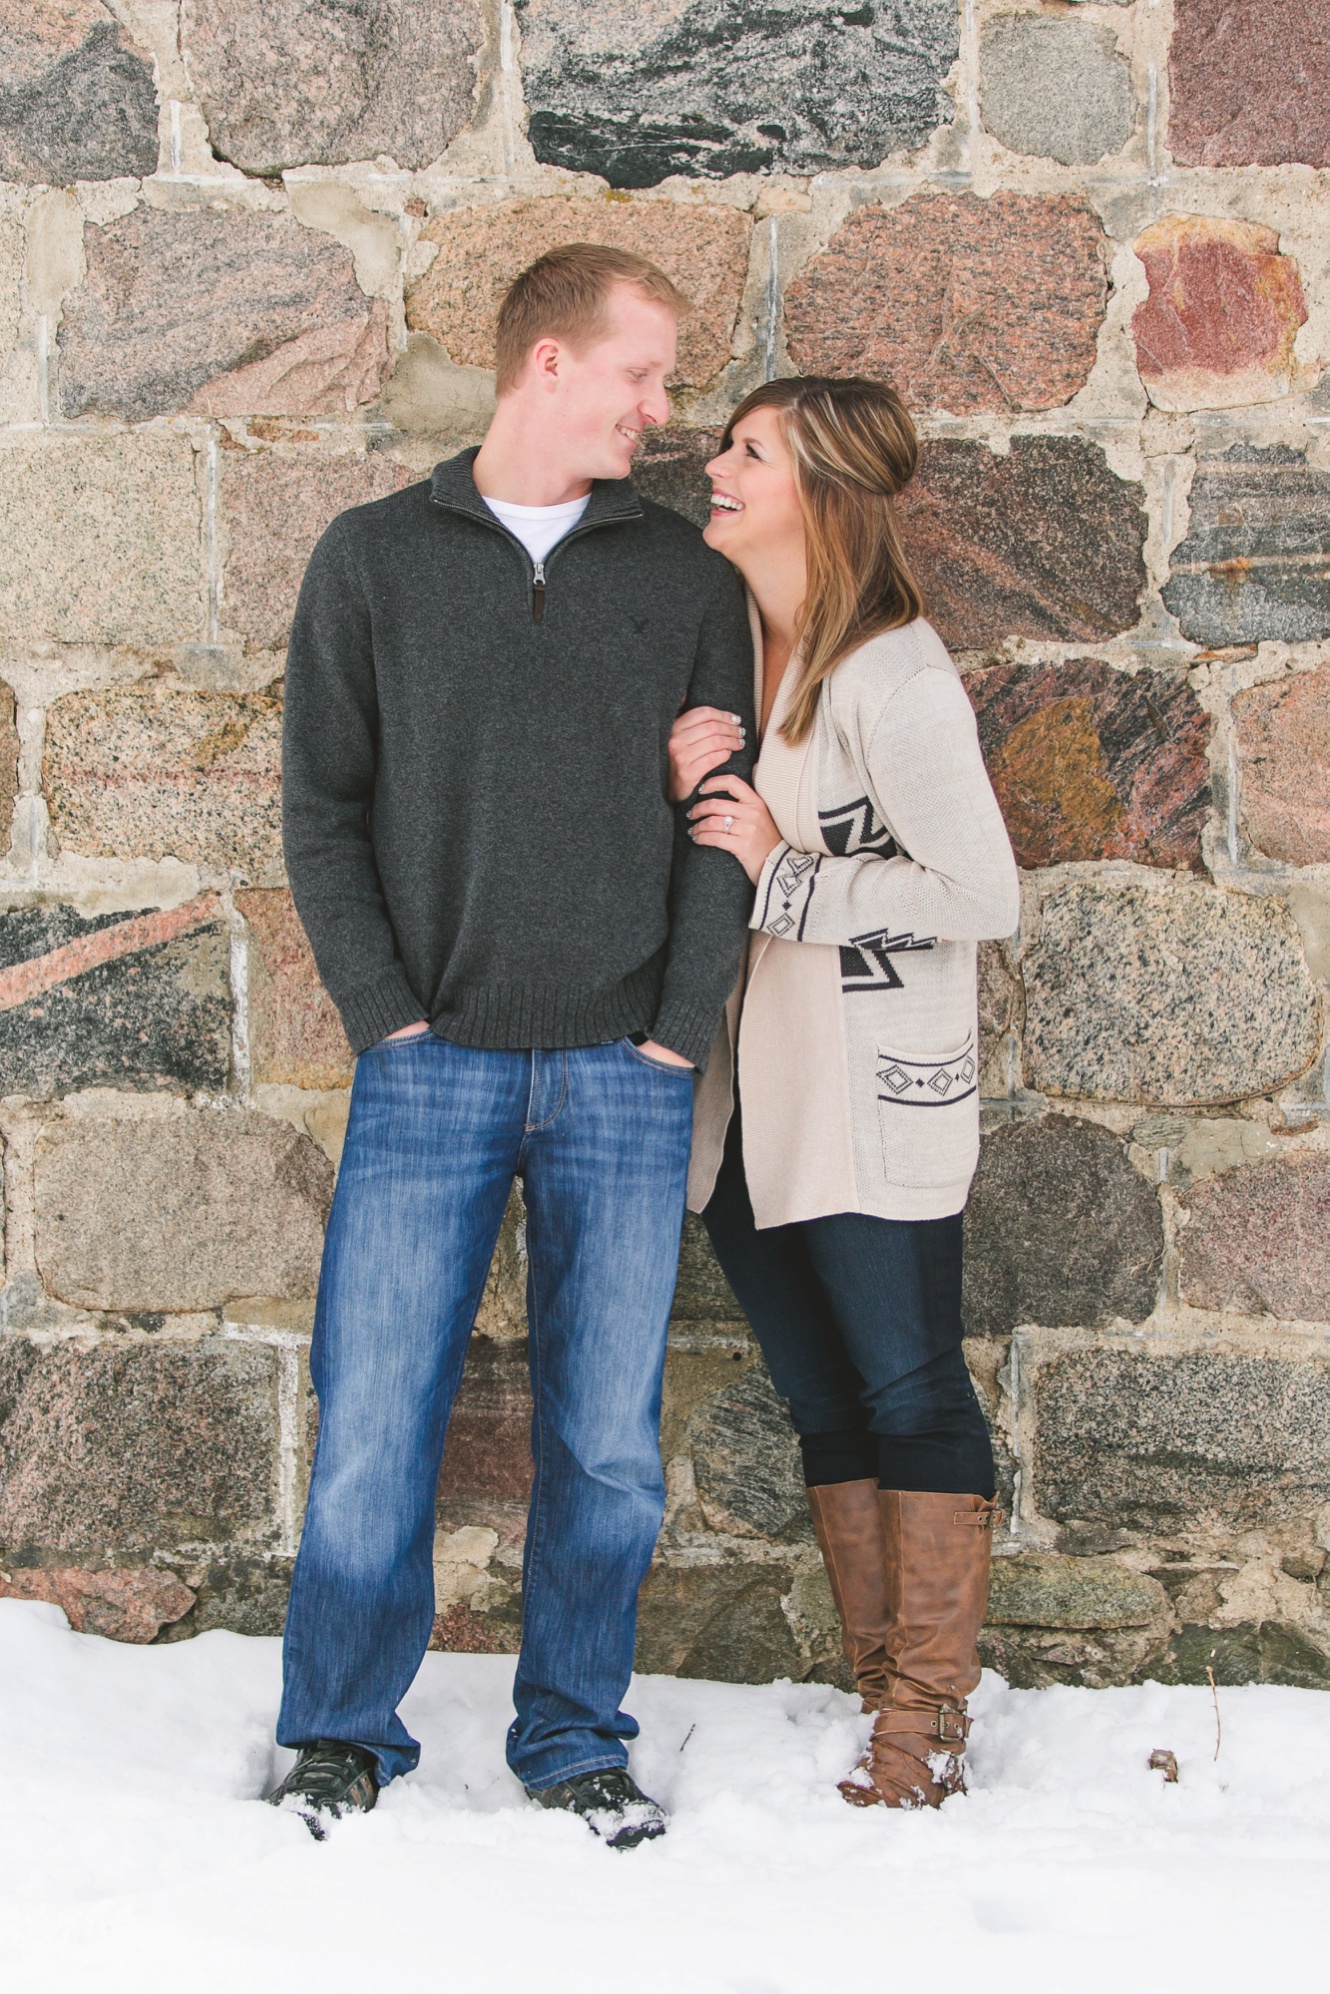 Fun Snowy Old Stone Country School Winter Engagement Photos Redvers SK